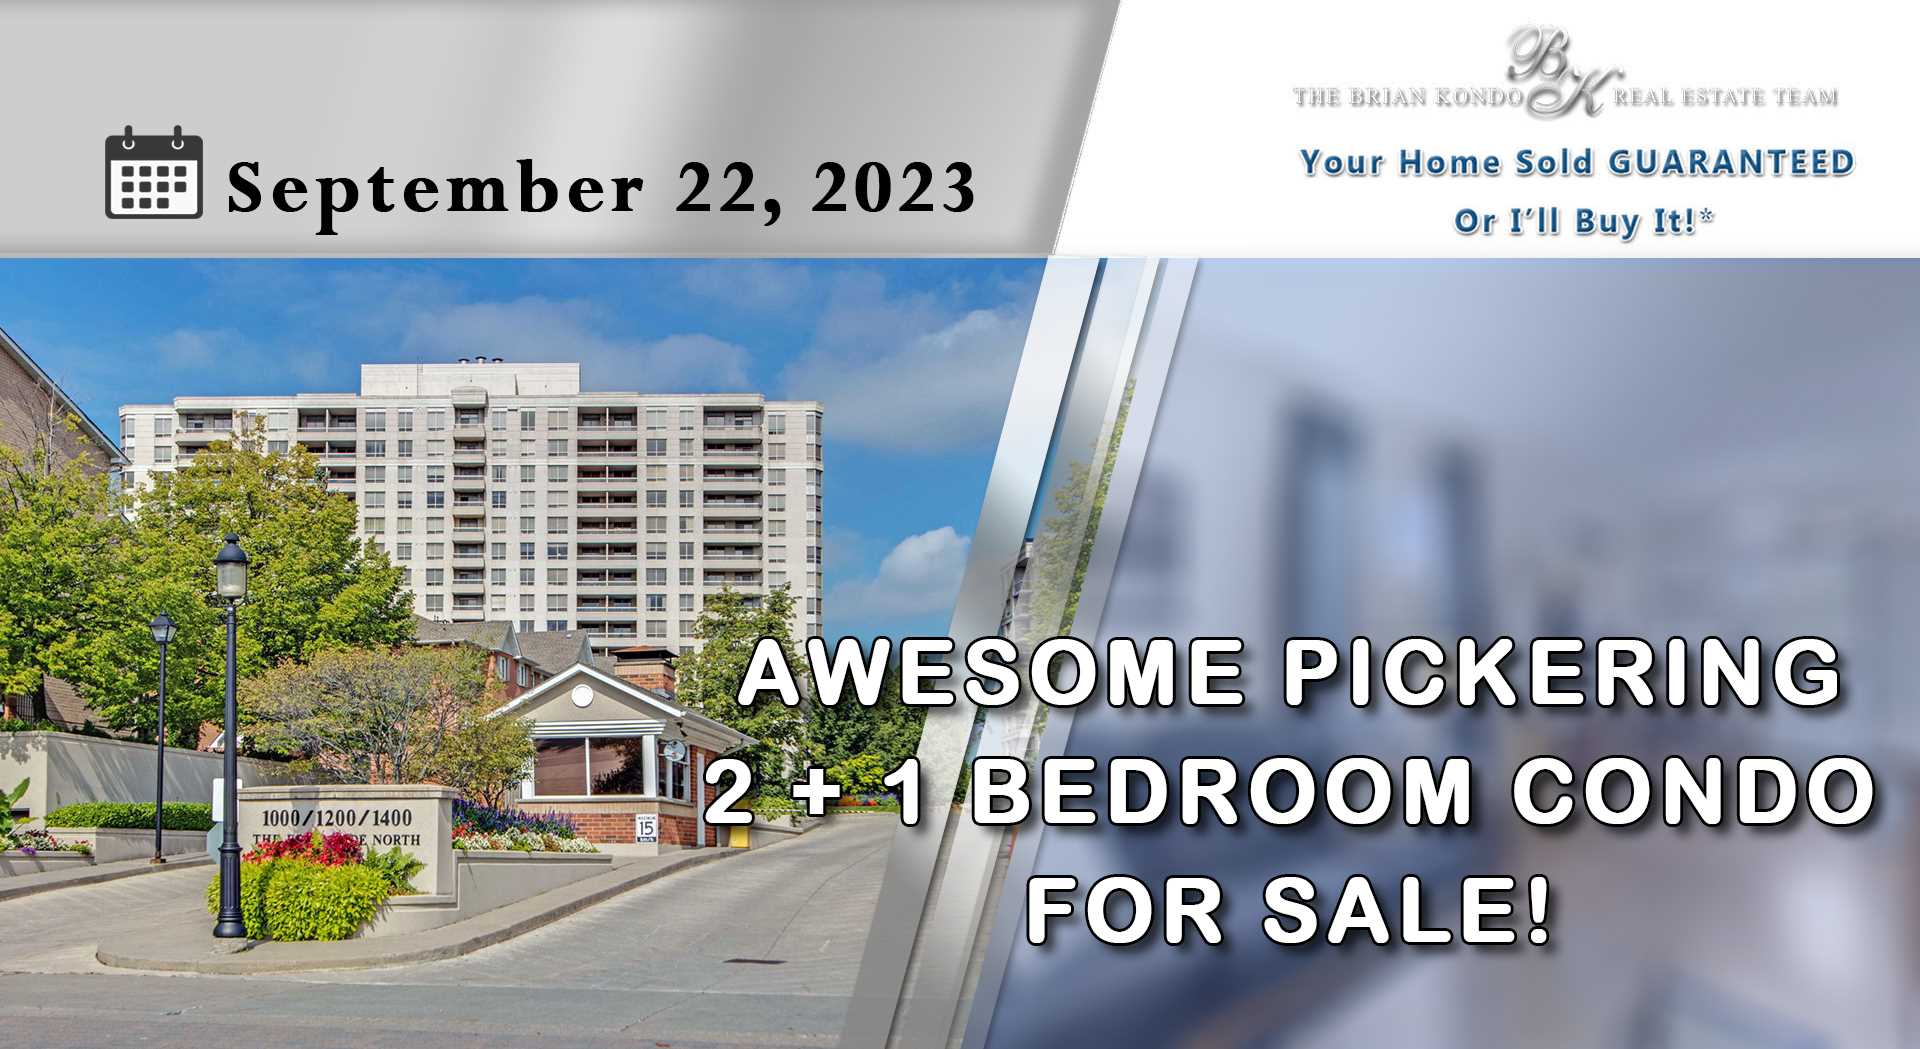 AWESOME 2 + 1 BEDROOM CONDO FOR SALE!